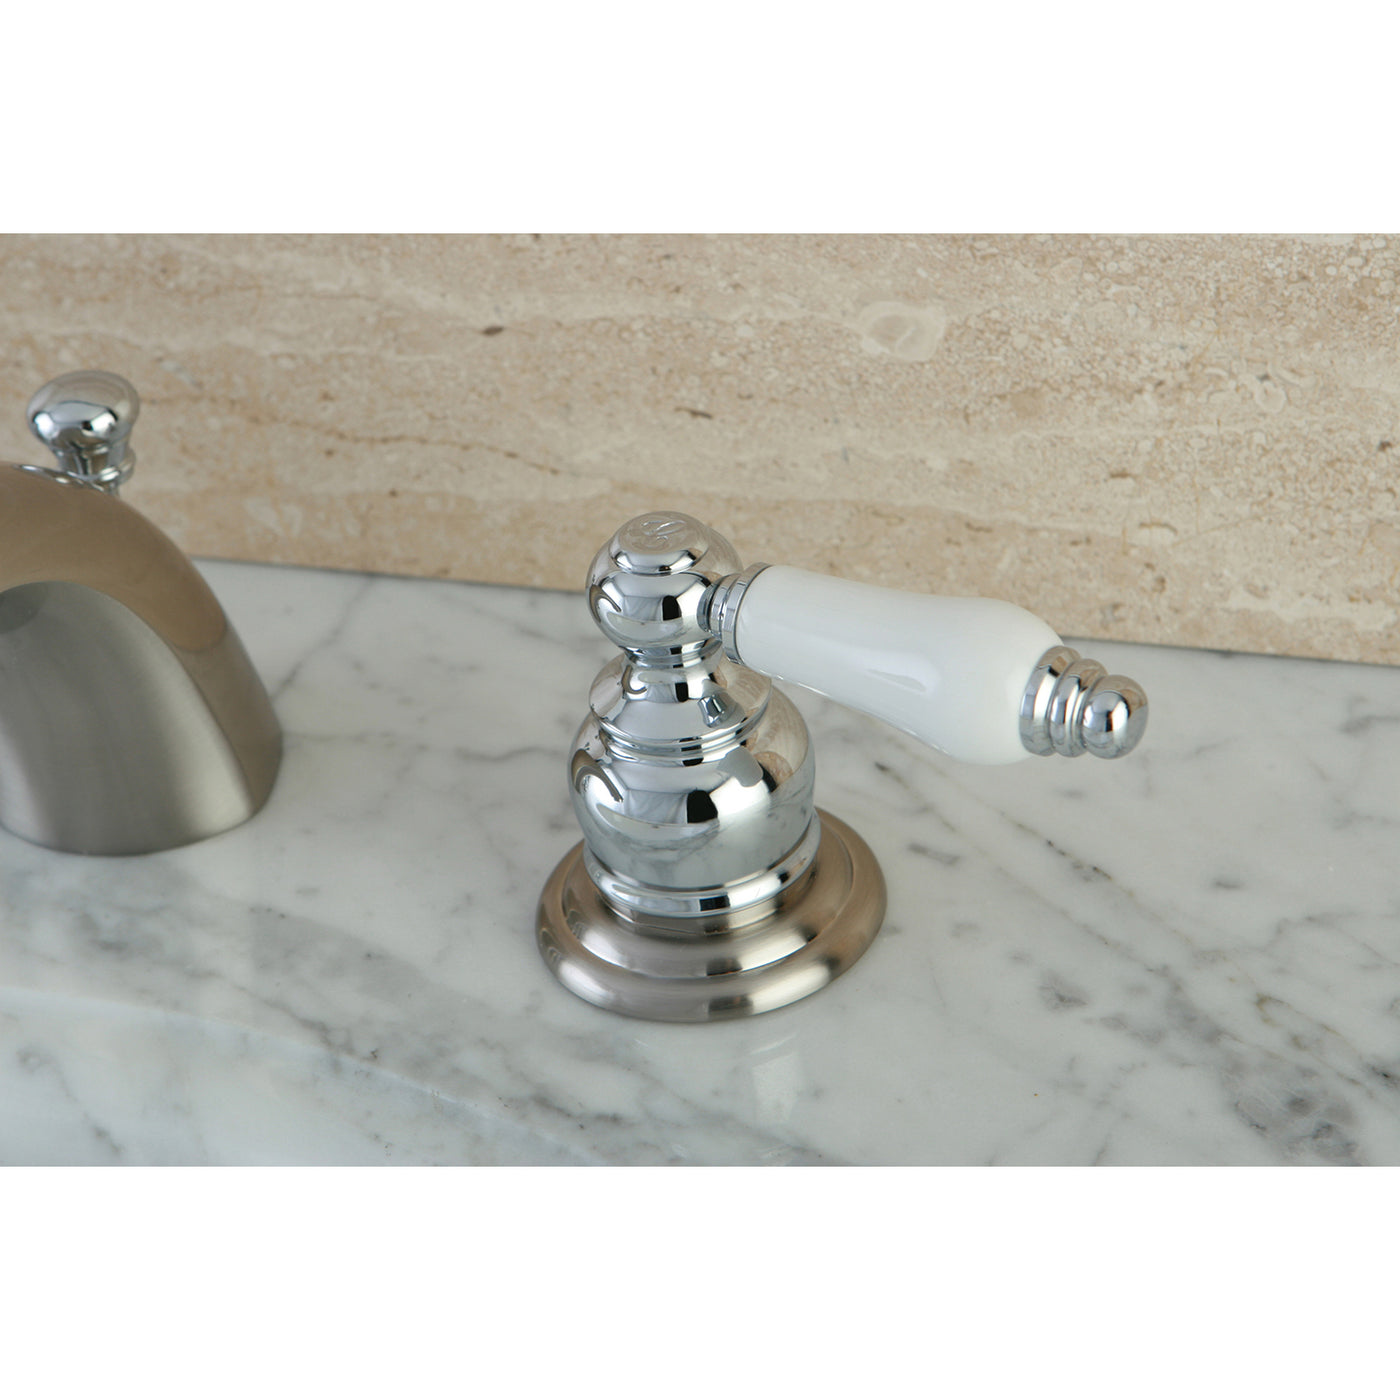 Elements of Design EB947B Mini-Widespread Bathroom Faucet with Retail Pop-Up, Brushed Nickel/Polished Chrome